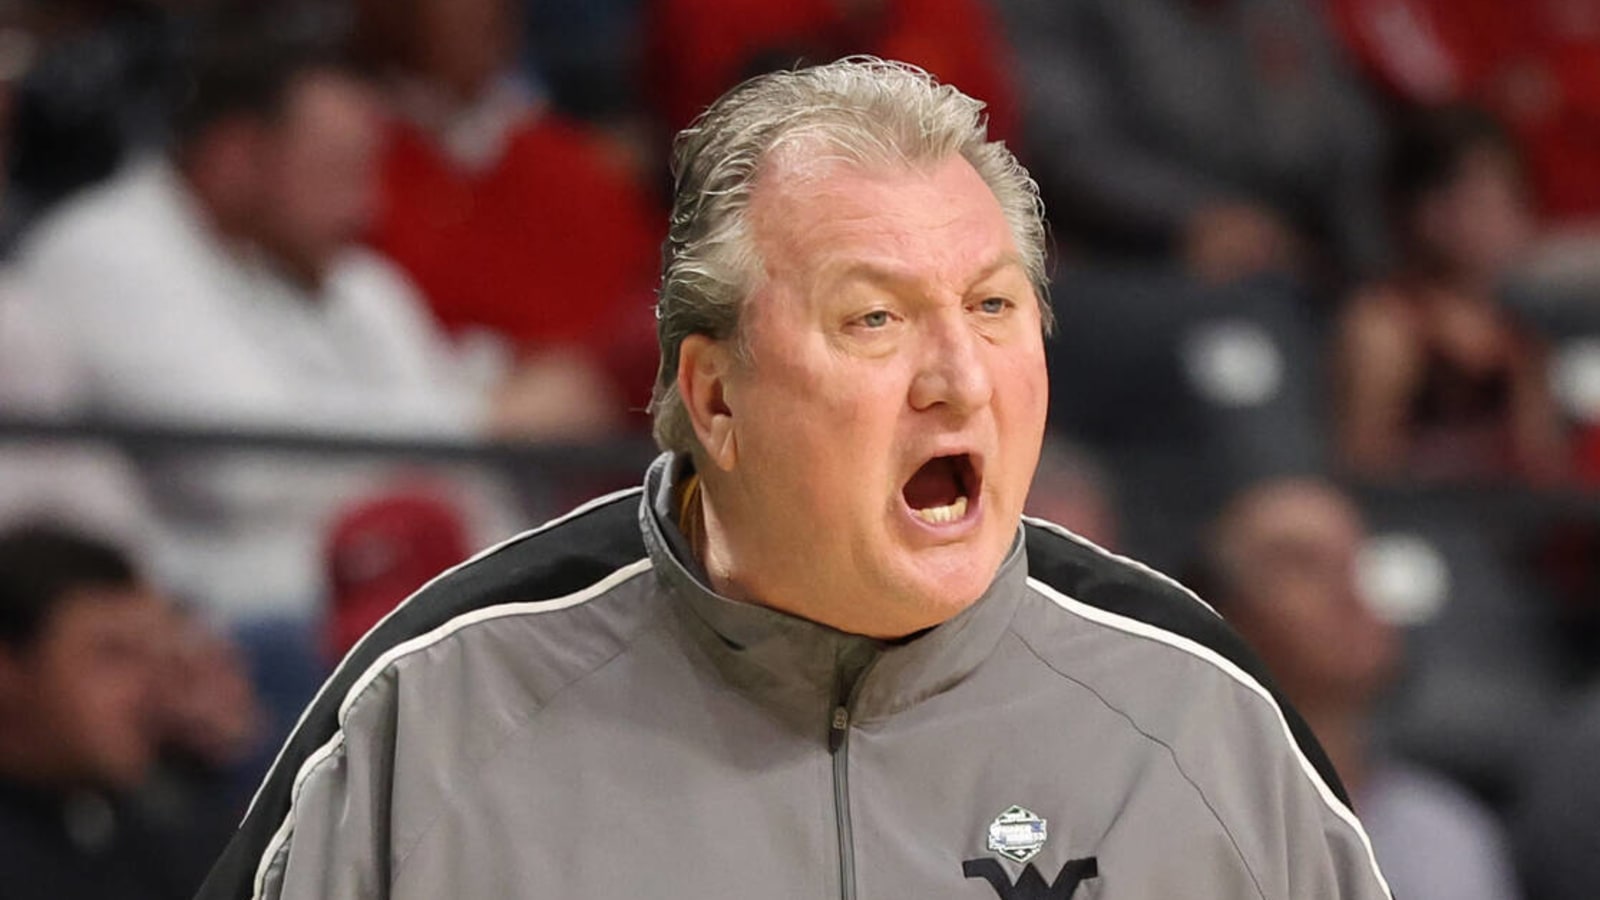 Huggins issues apology for using slur during interview